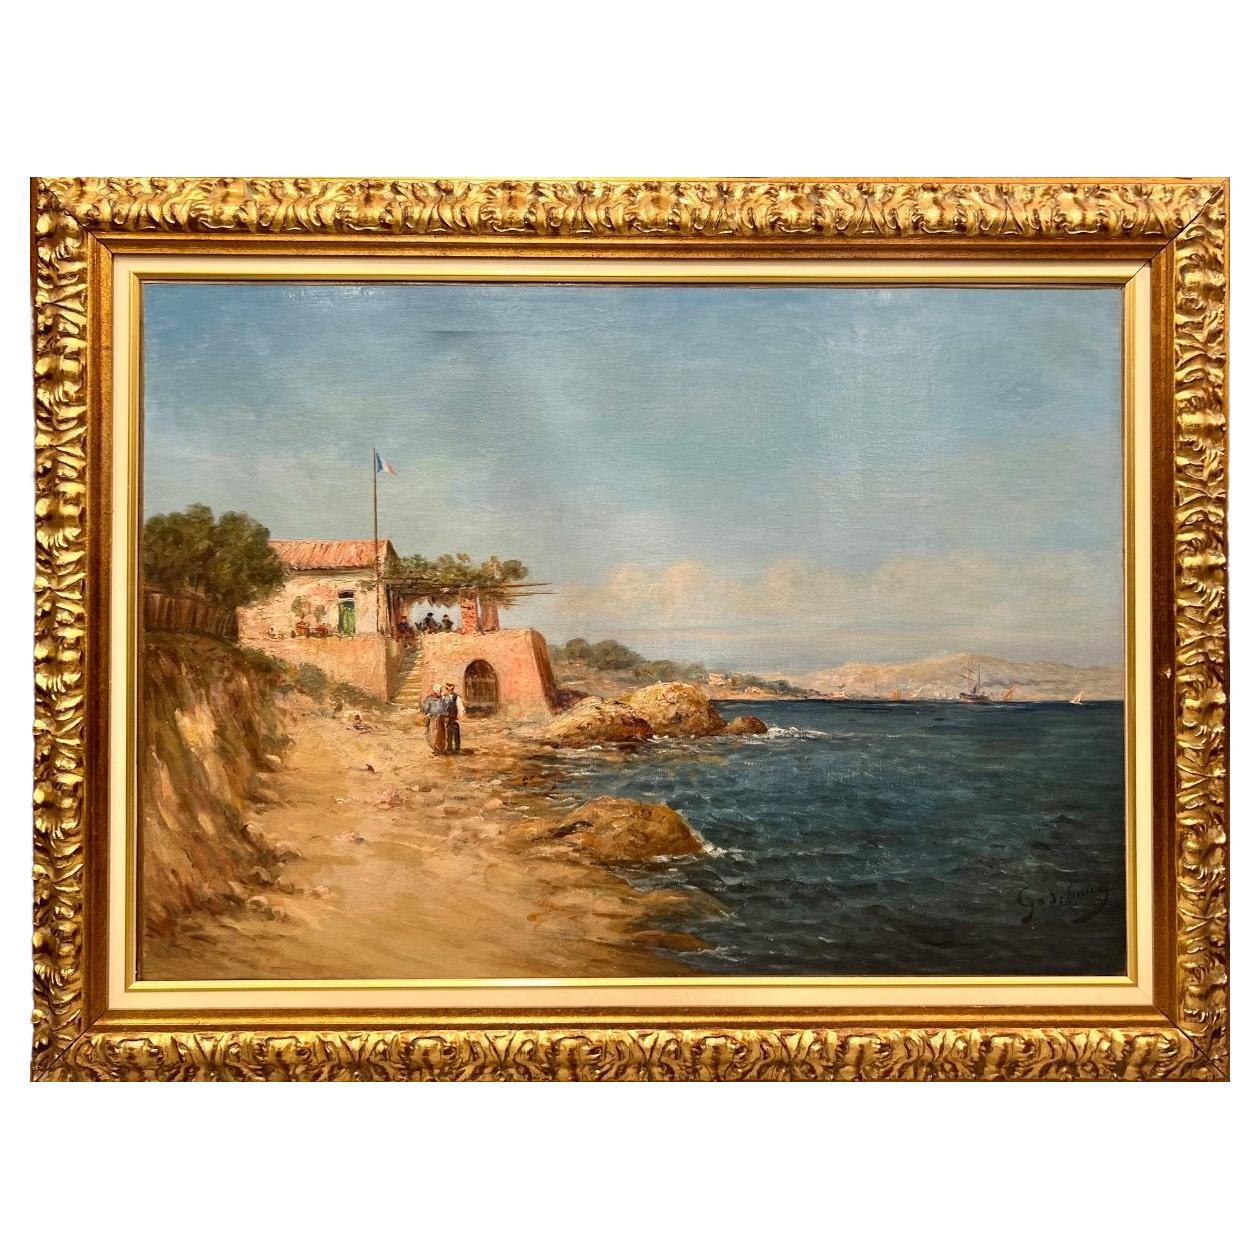 19th Century Oil Painting of a French Coast by Emile Godchaux (1860-1938)